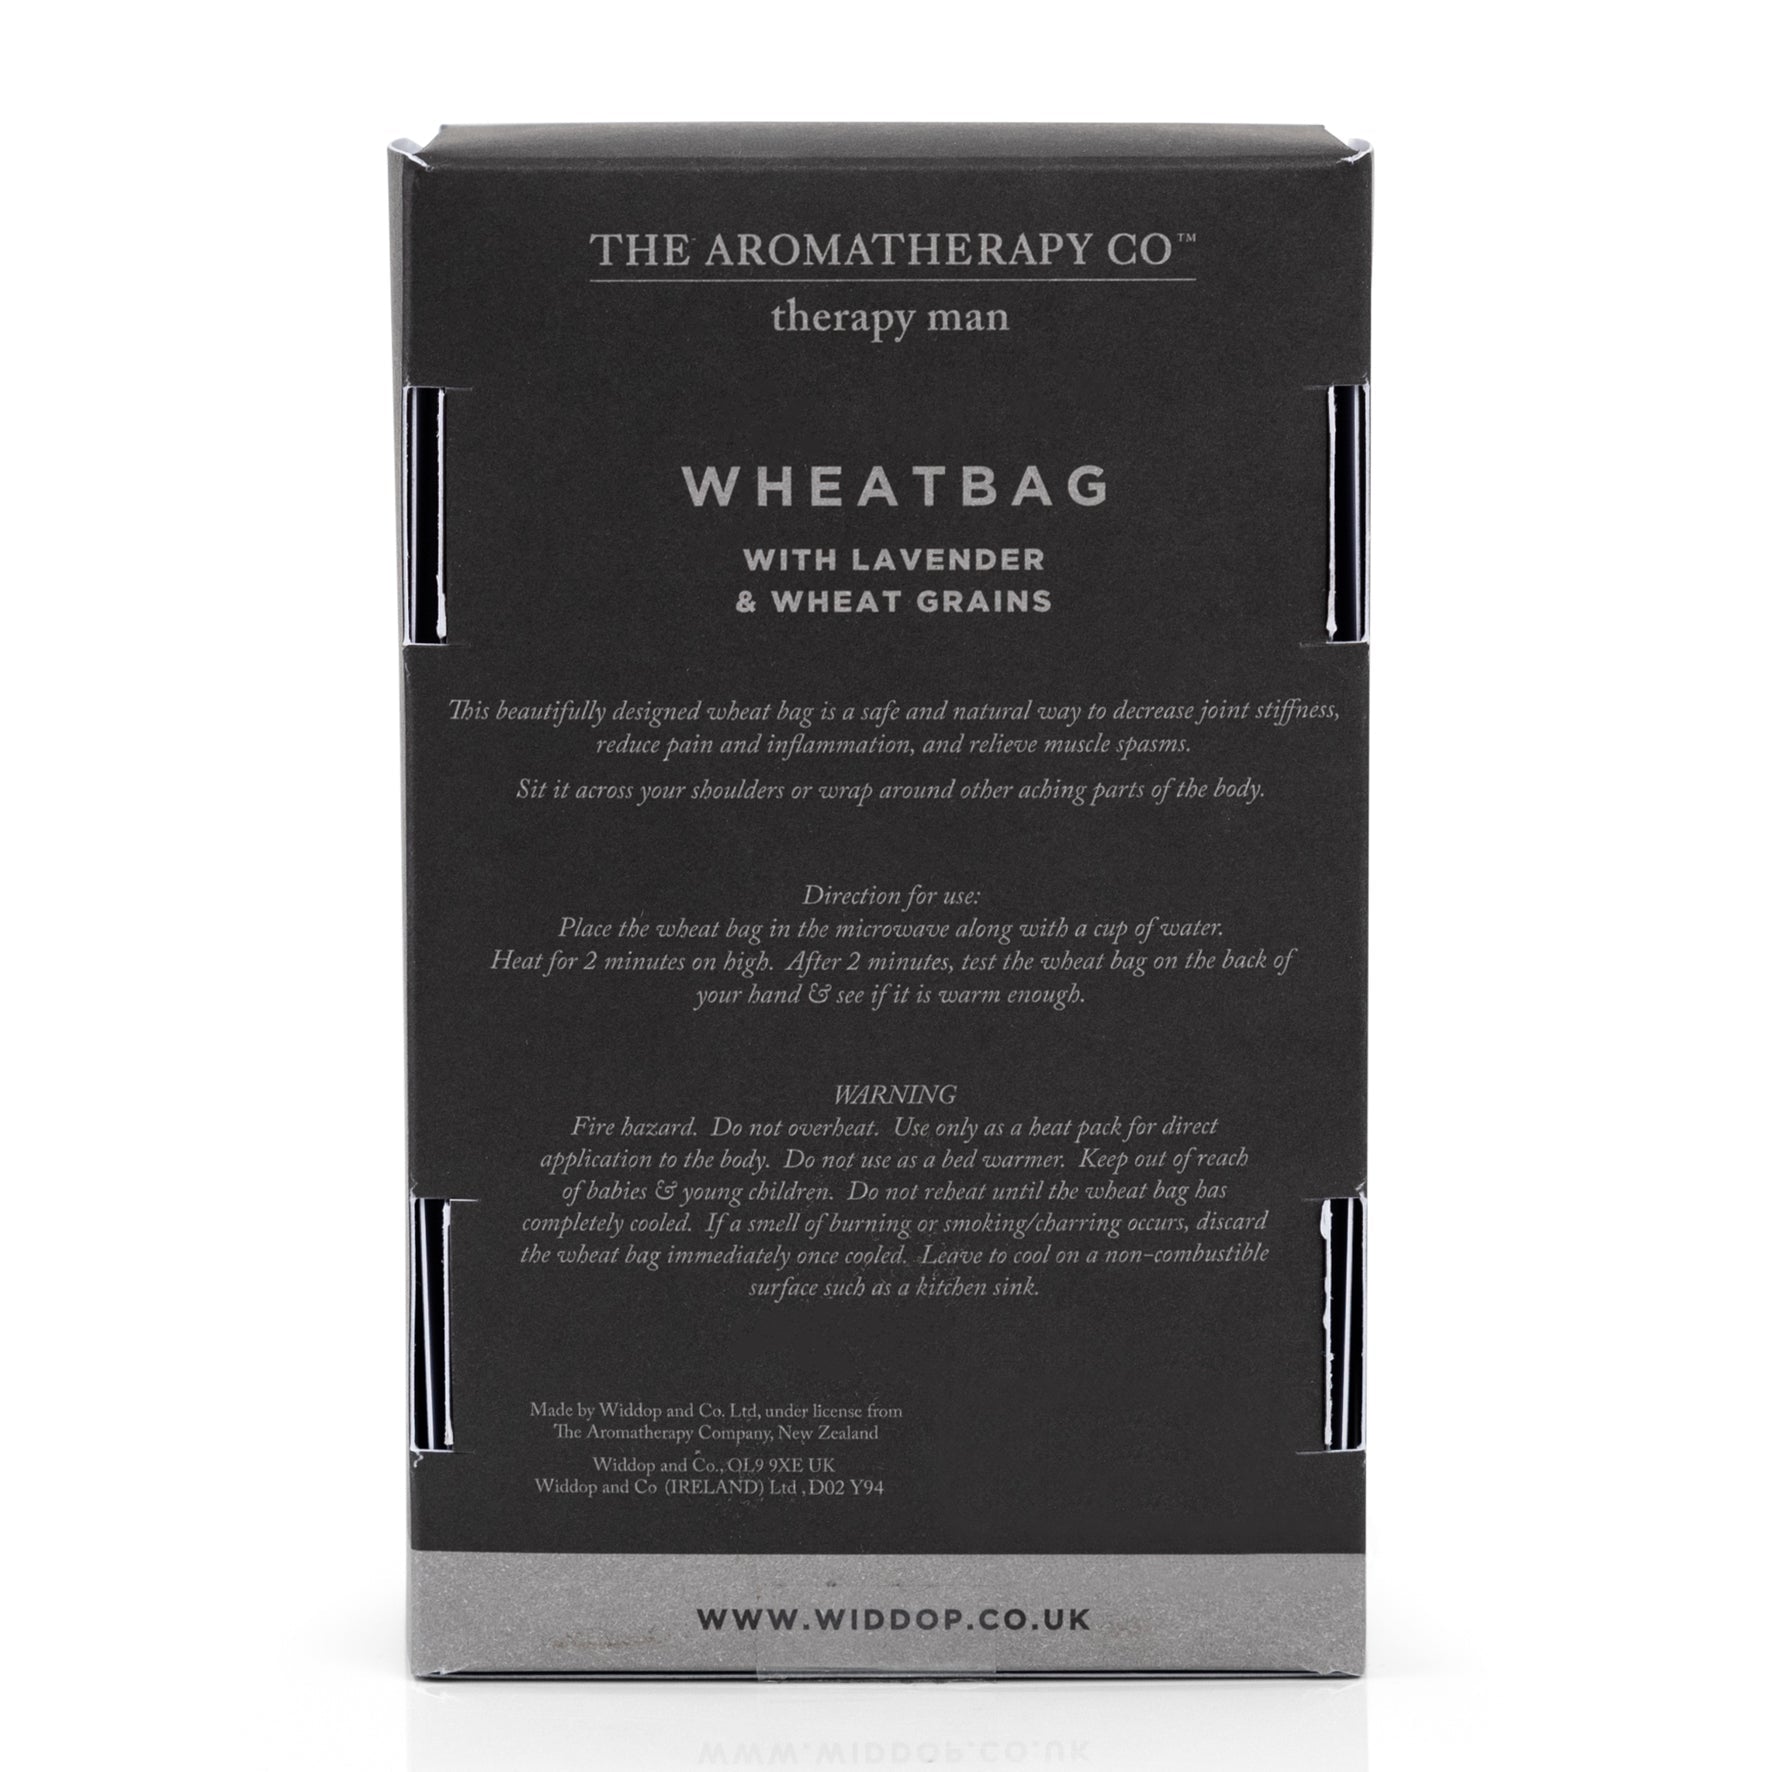 The Aromatherapy Co Therapy Man Soothing Wheat Bag With Lavender and Wheat Grains